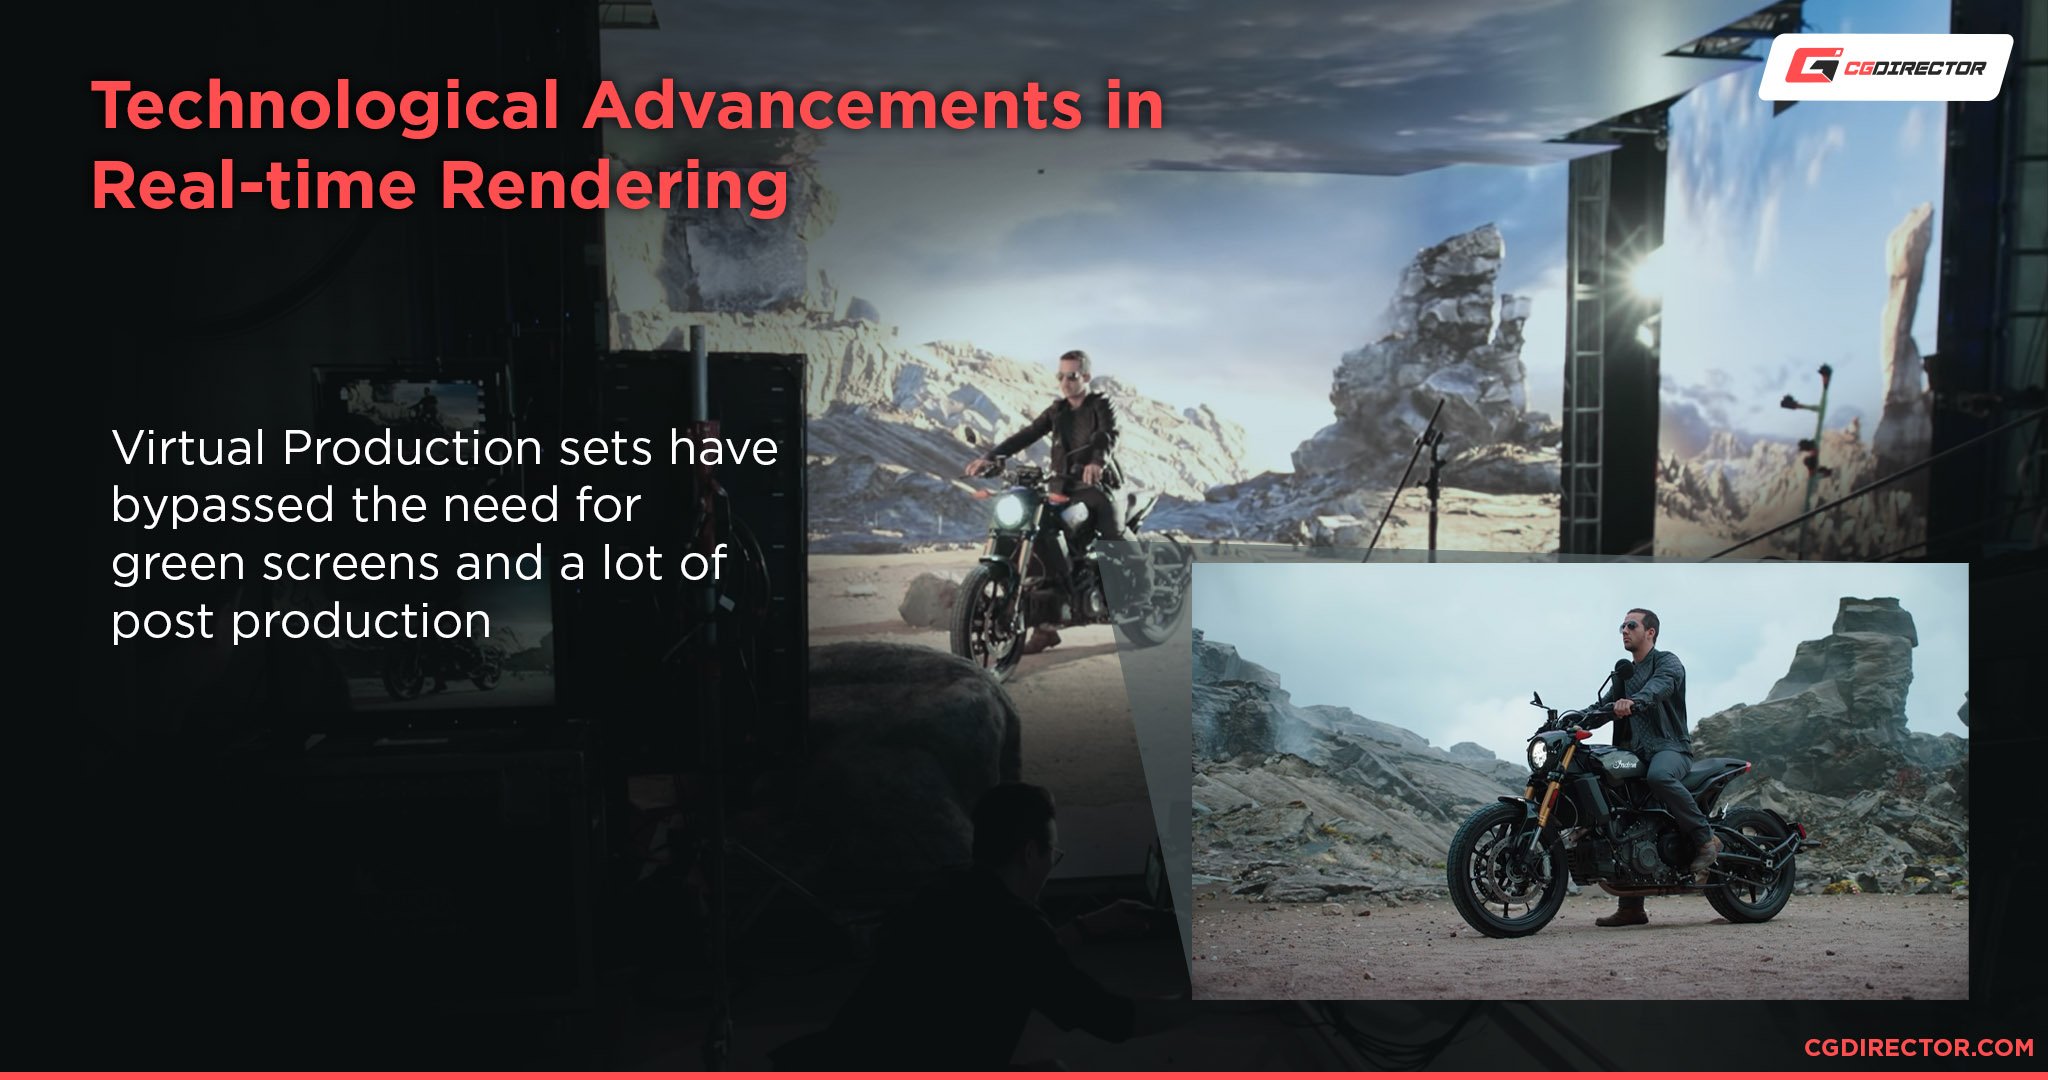 Technological Advancements in real-time rendering